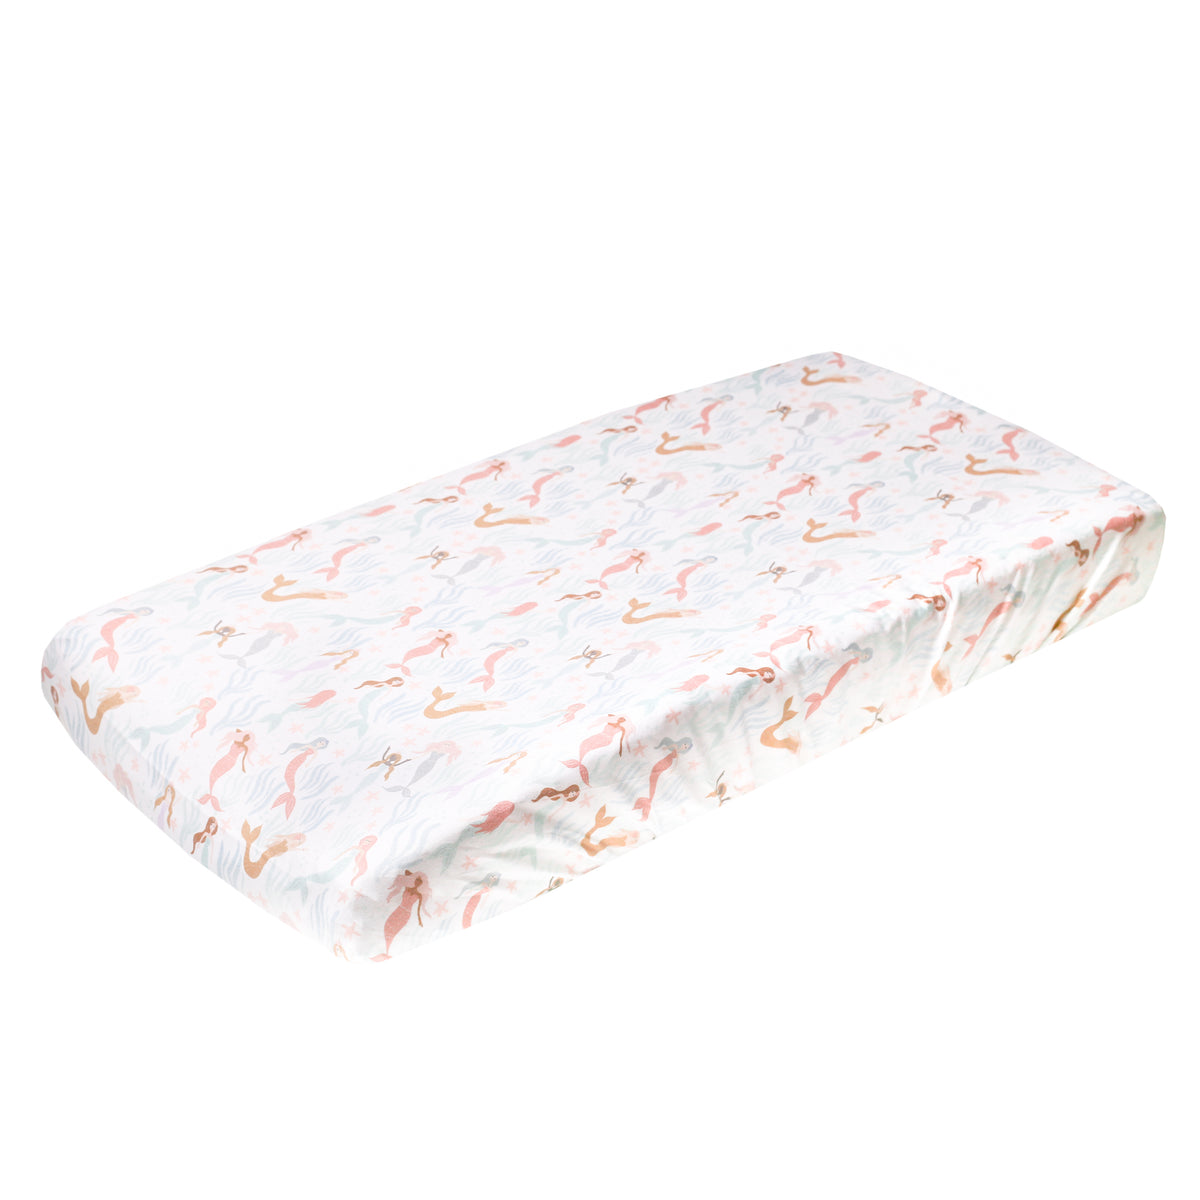 Premium Knit Diaper Changing Pad Cover - Coral